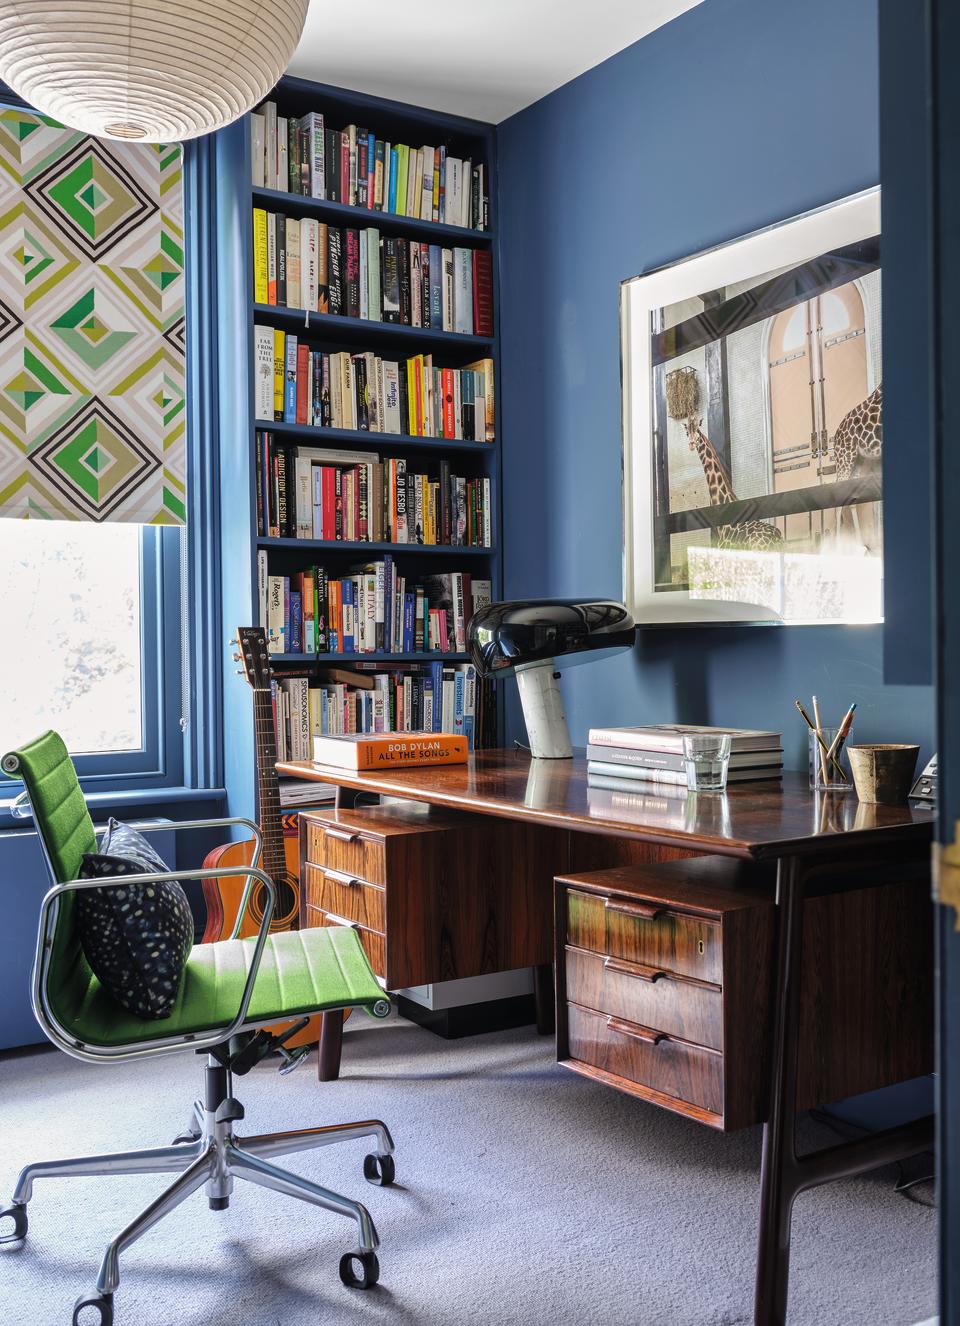 21. PATTERN CAN ADD INSTANT GLAMOR TO A HOME OFFICE